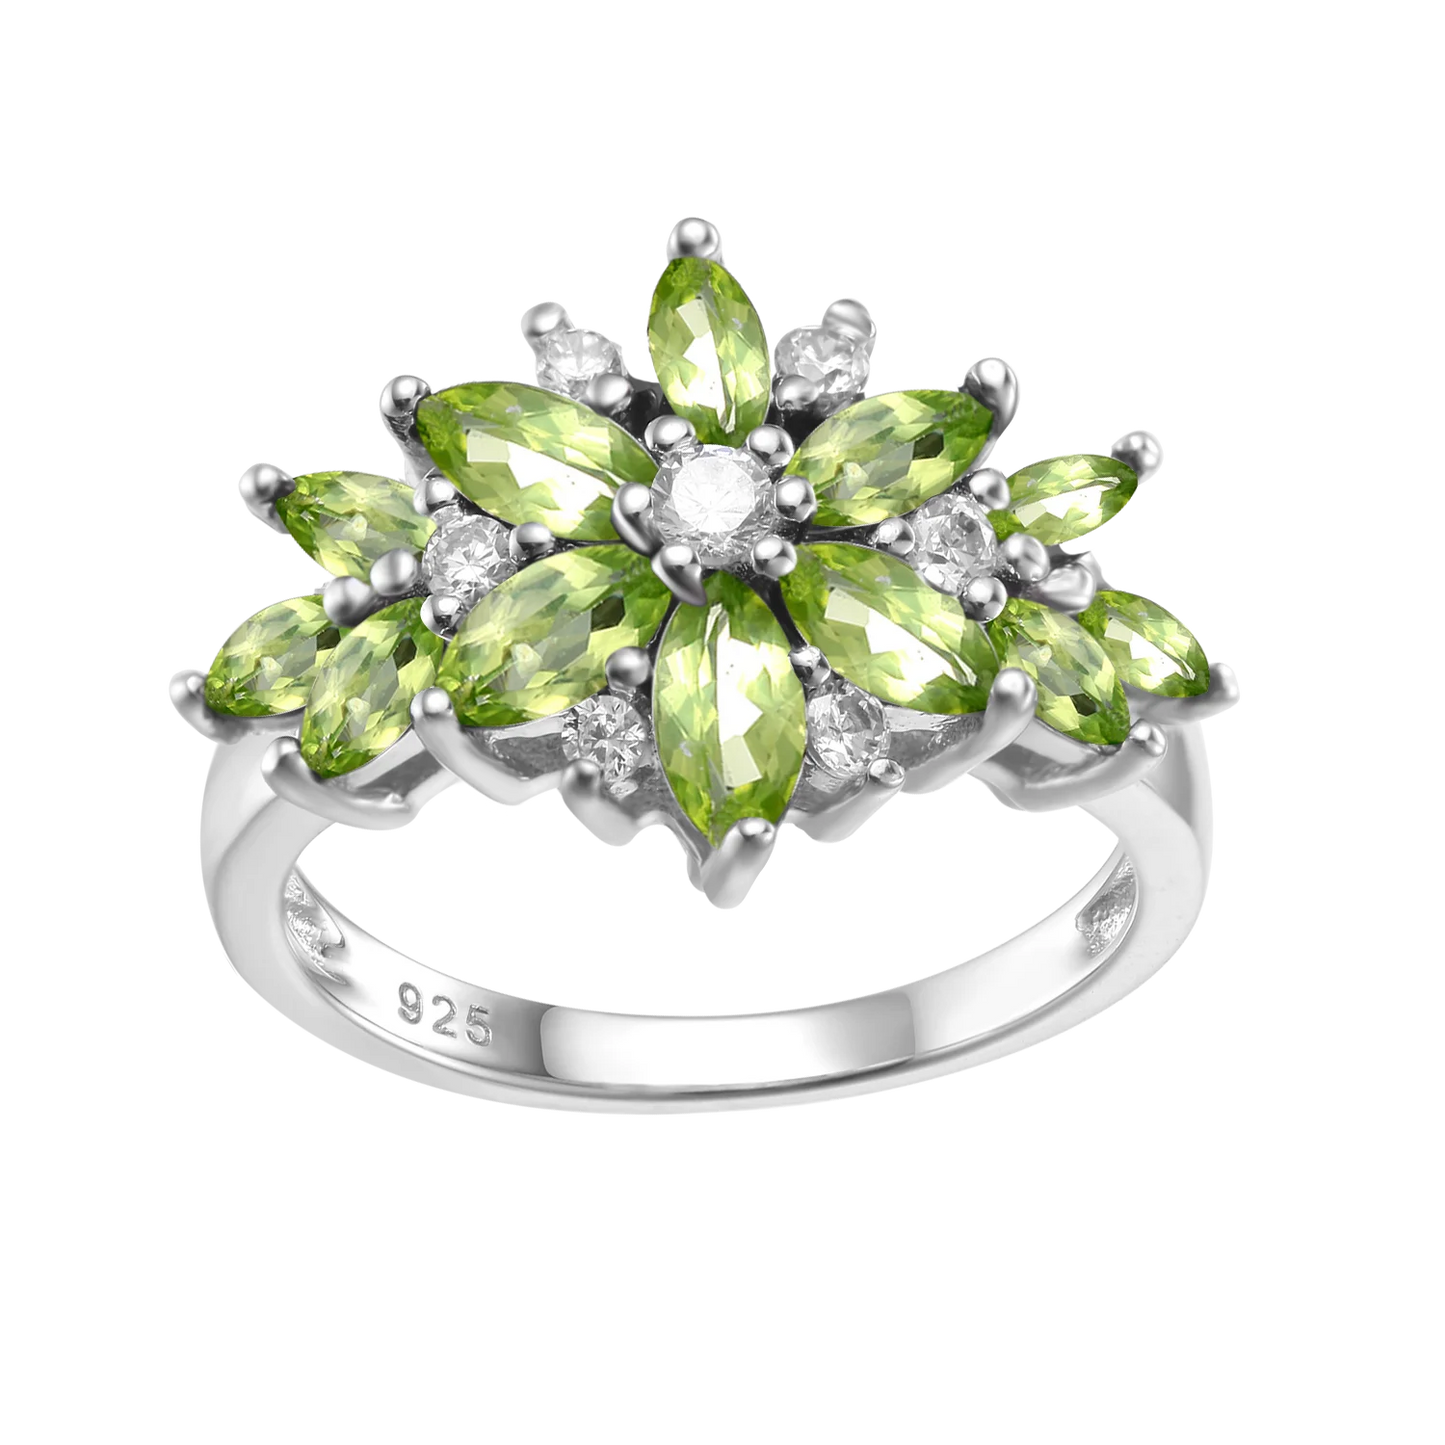 GEM'S BALLET Real 925 Sterling Silver Tourmaline Rings For Women Natural Gemstone Ring Romantic Gift Engagement Jewelry Peridot CHINA